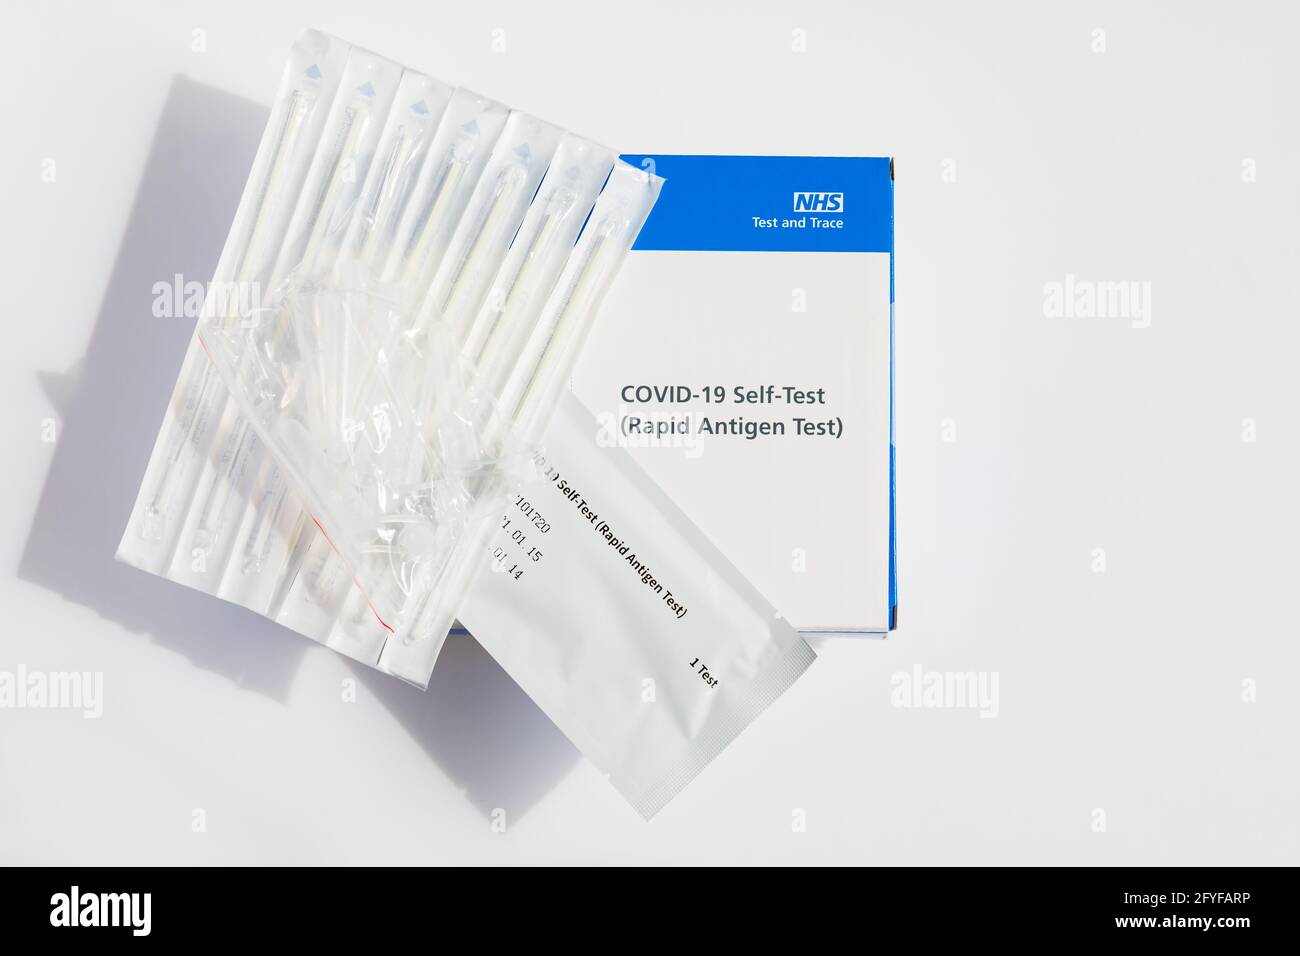 Covid-19 Self-test Rapid antigen test kit in box for home use., showing the contents. swabs and tester. Stock Photo